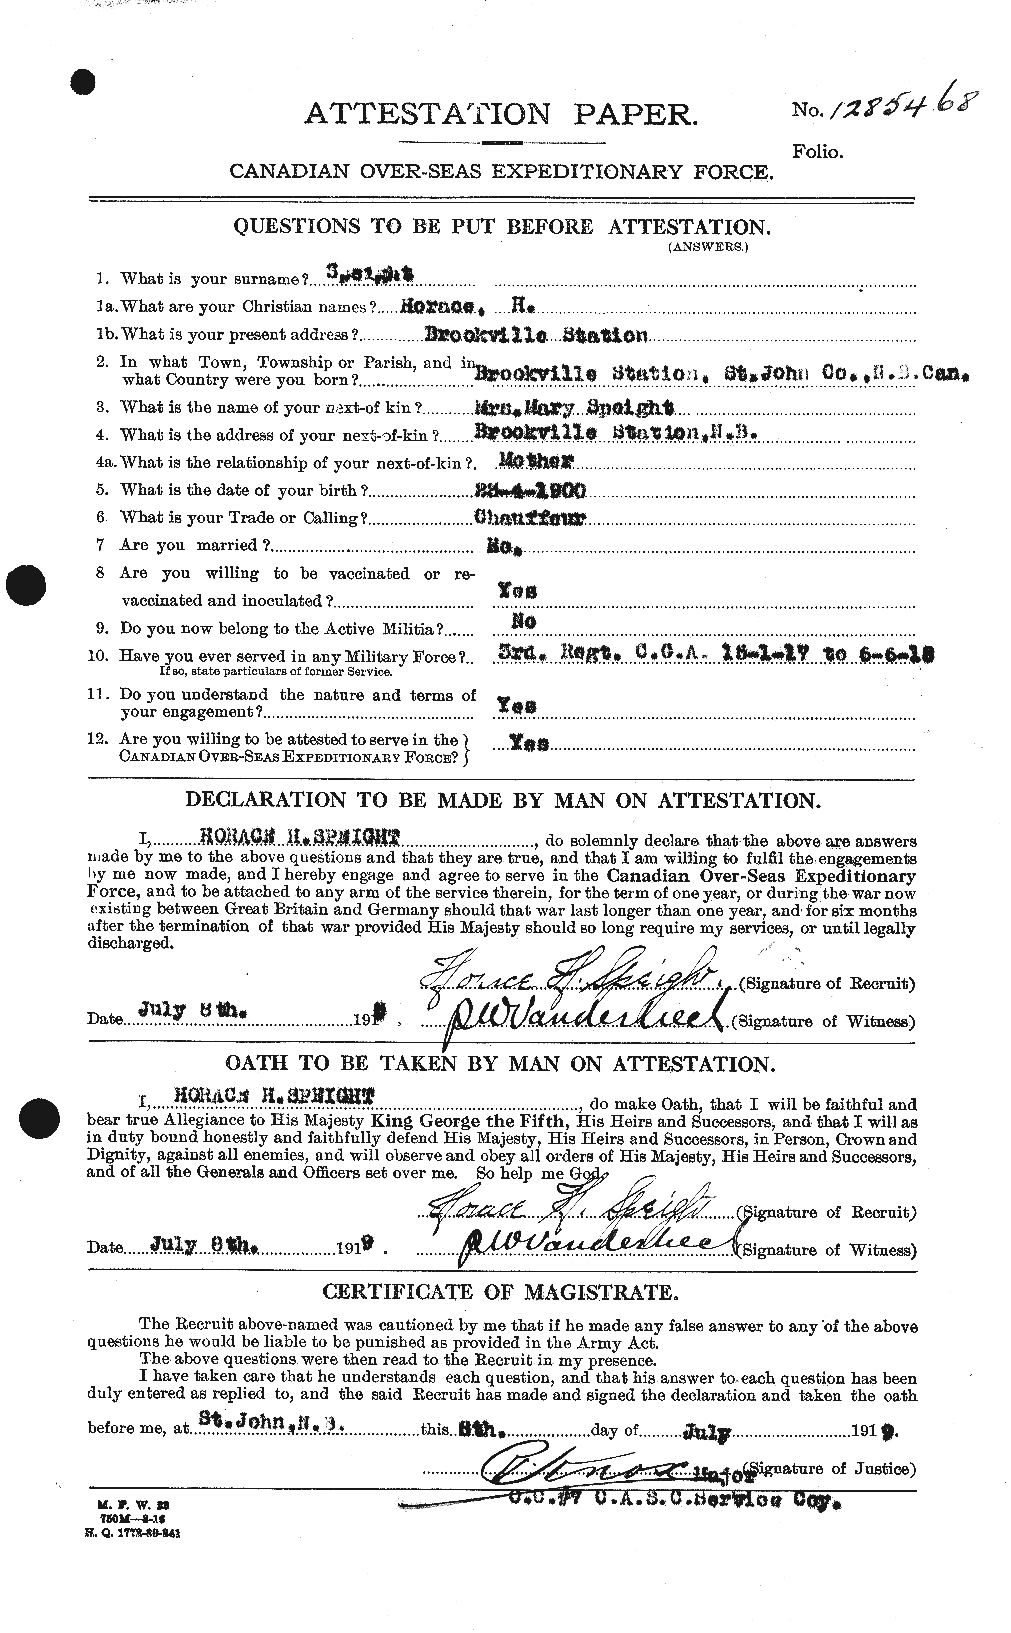 Personnel Records of the First World War - CEF 110071a